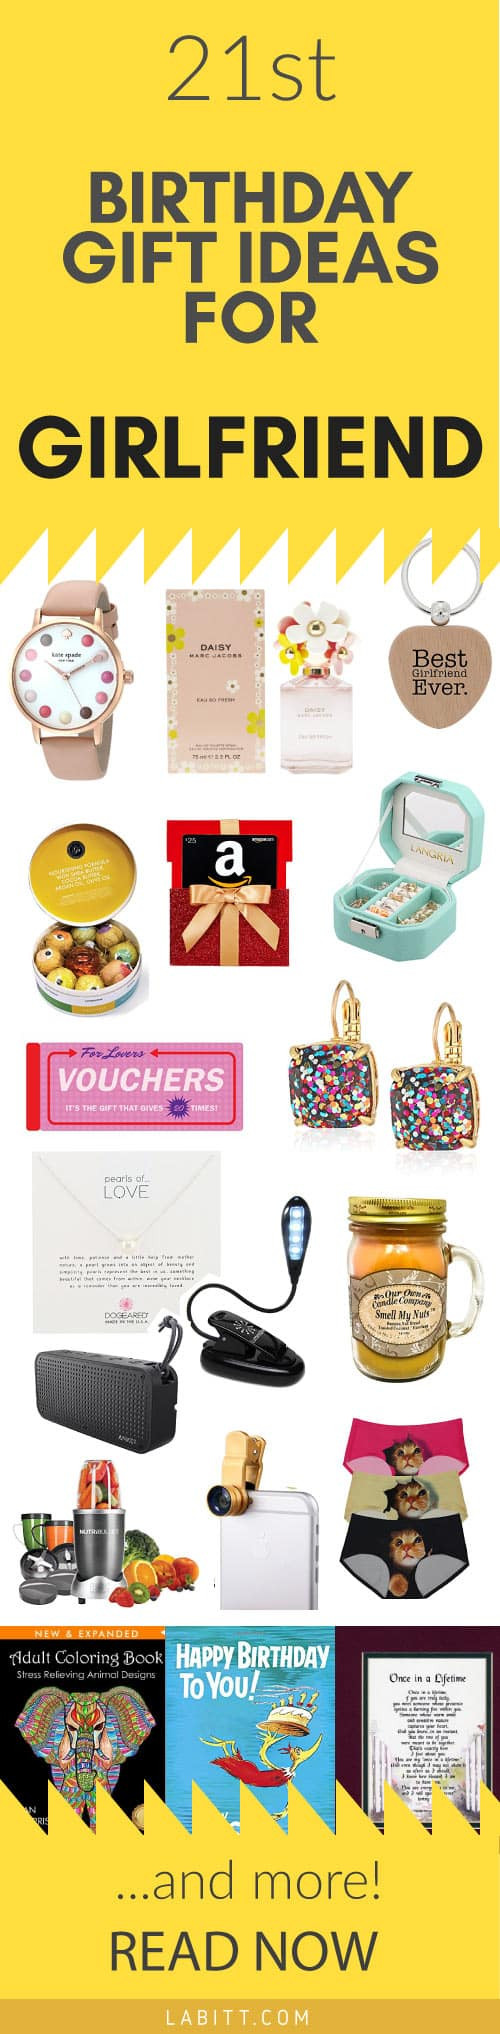 21St Birthday Gift Ideas For Her
 Creative 21st Birthday Gift Ideas for Girlfriend 21